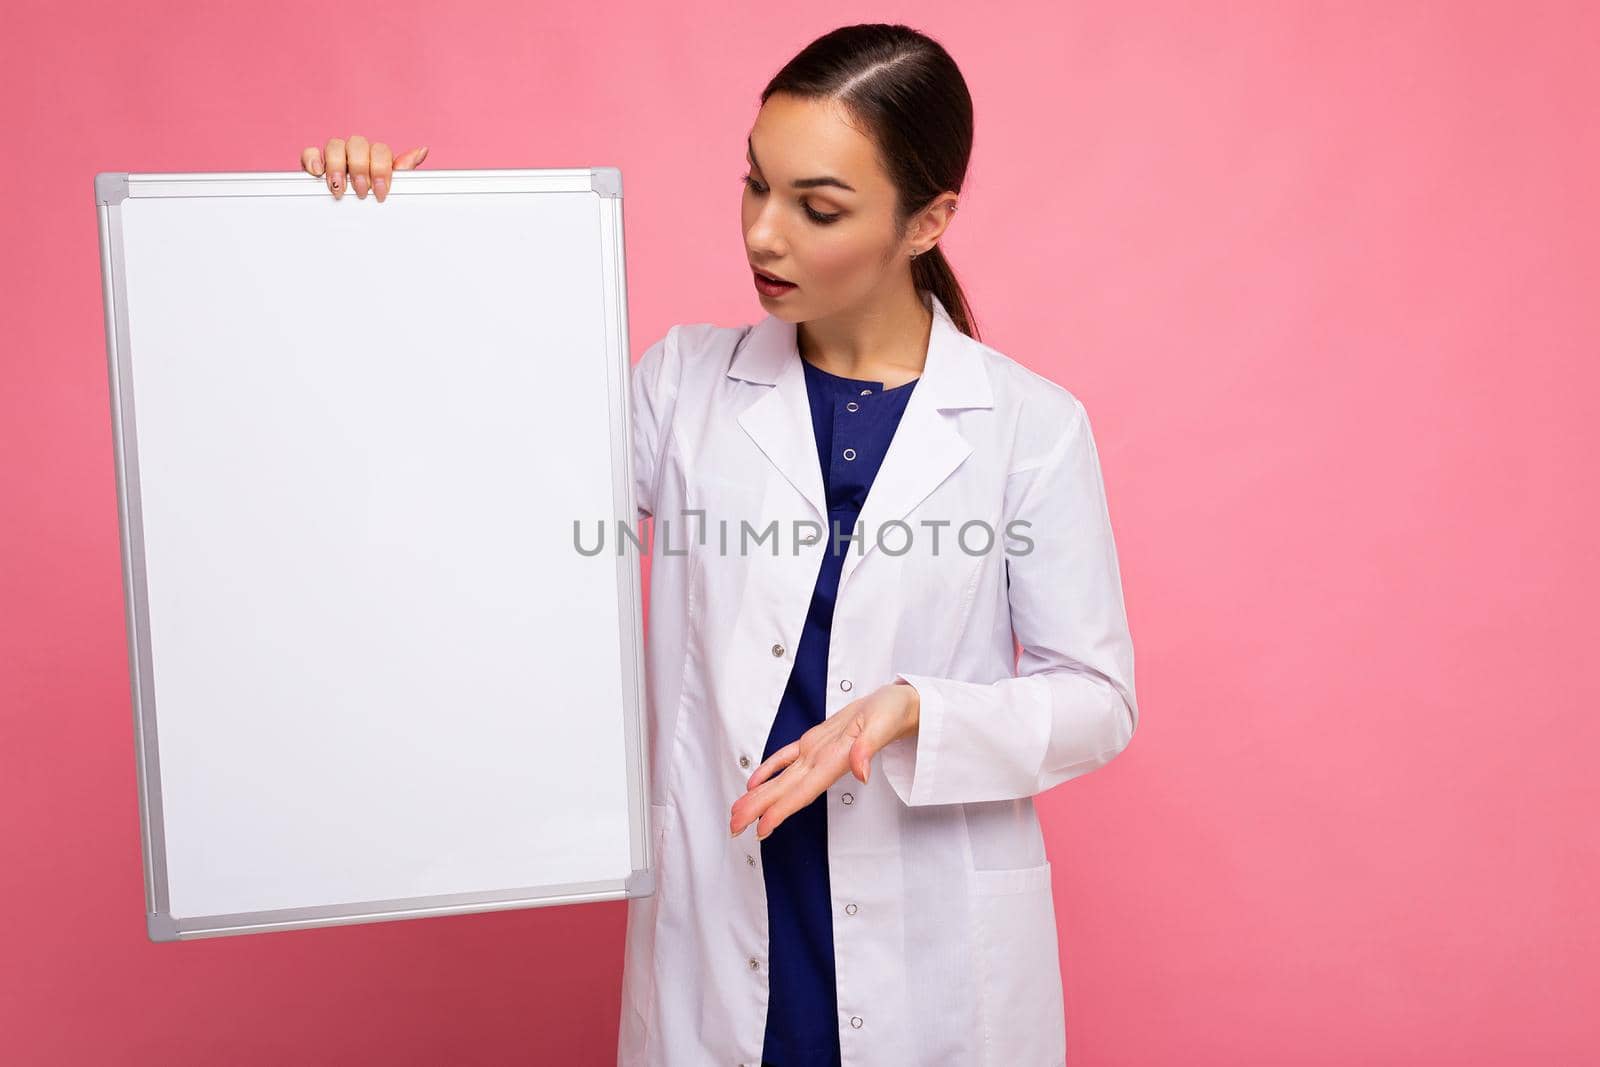 Young of beautiful happy brunet woman wearing medical white coat holding white magnetic board for mockup isolated on pink background with empty space.